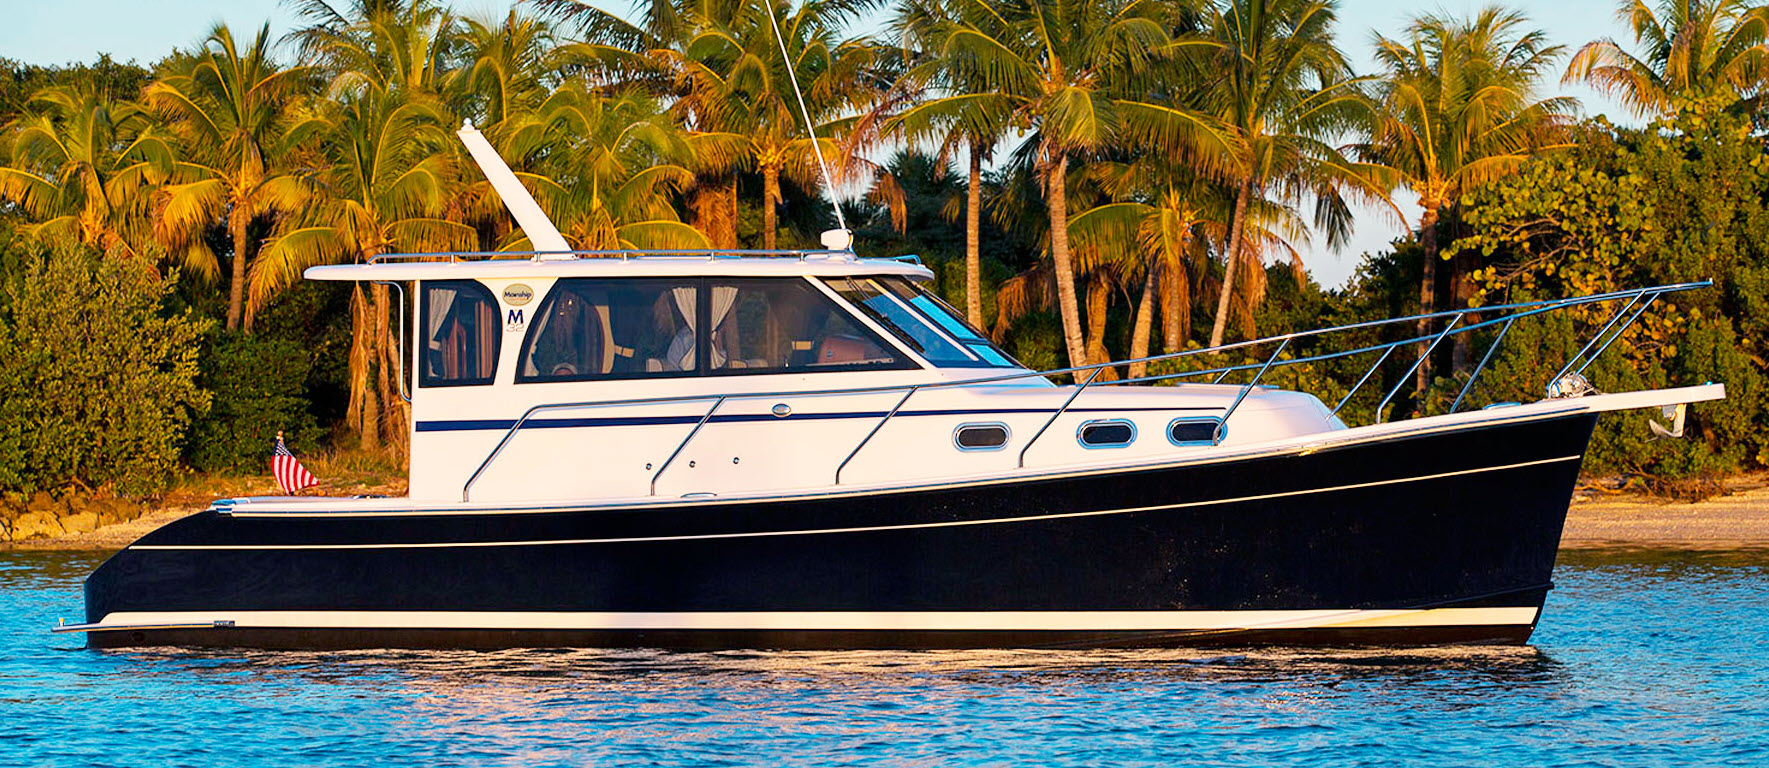 Mainship Yachts for Sale